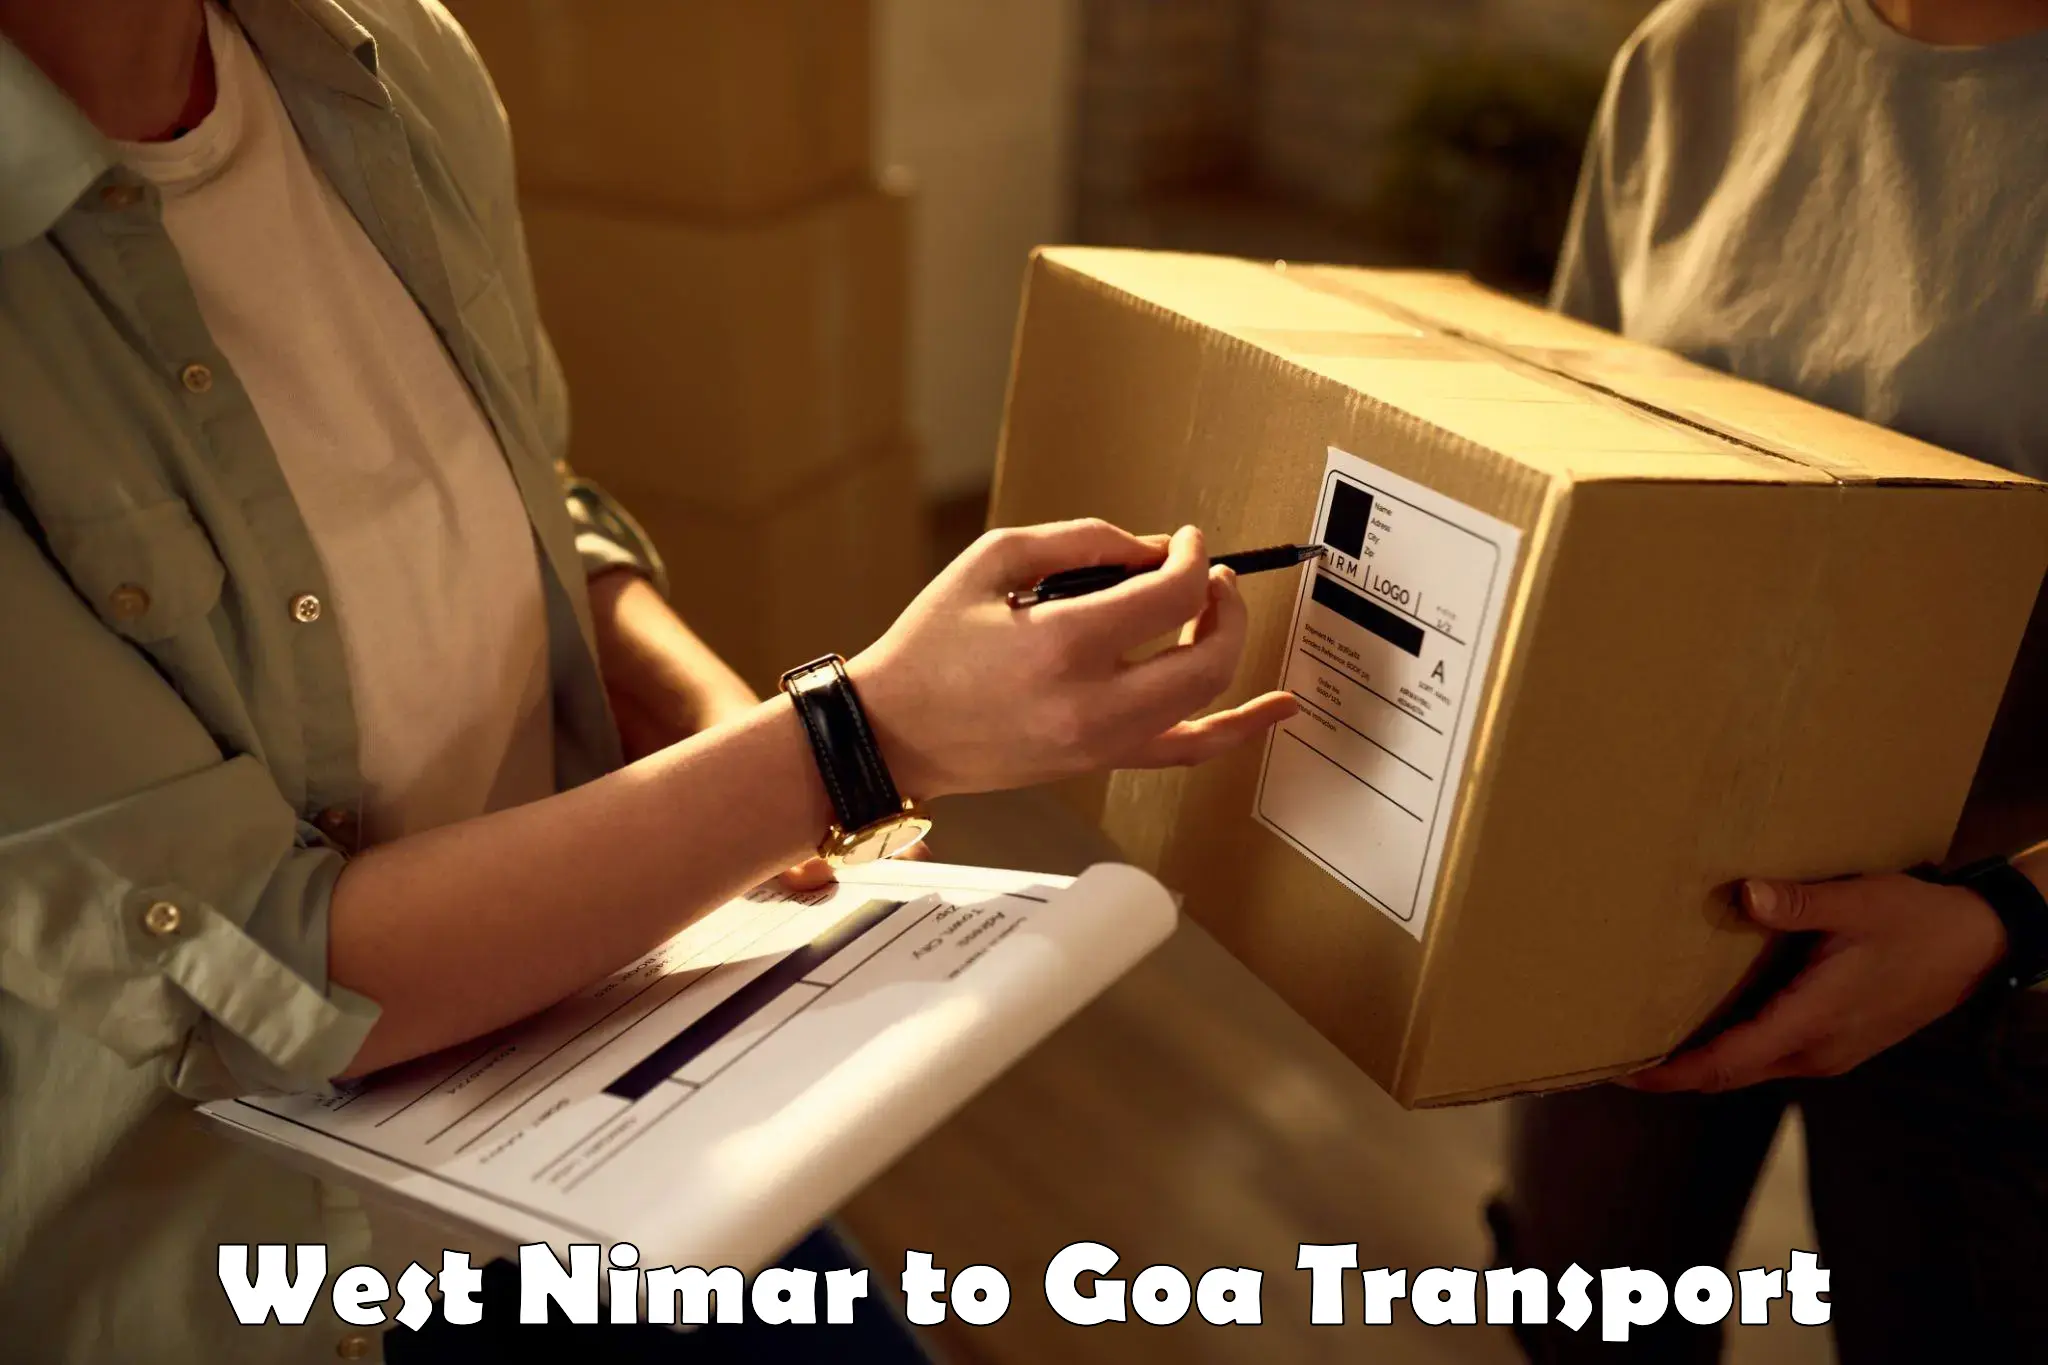 Delivery service West Nimar to Margao